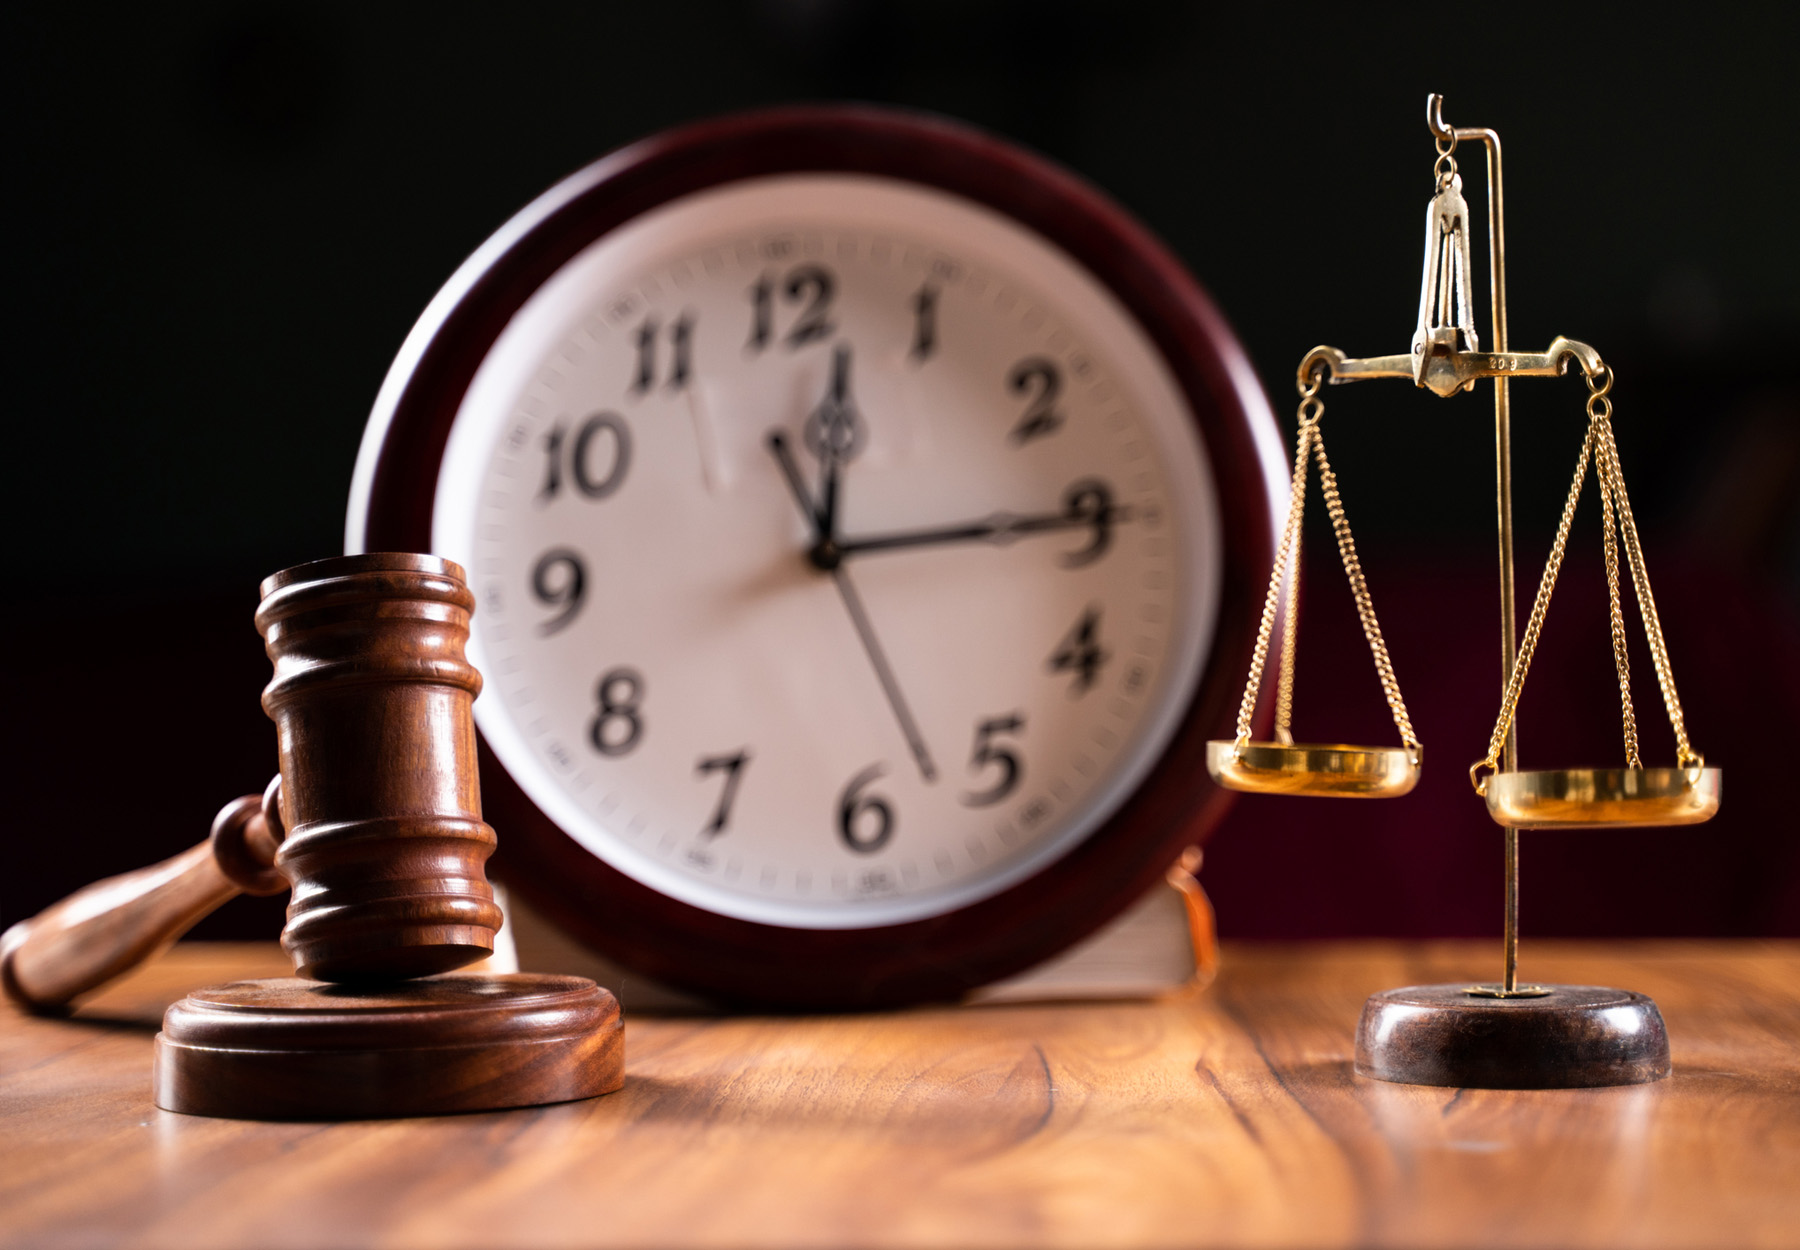 Image of gavel and scales on a wooden table with a clock in the background. Court delays concept. Stock image.